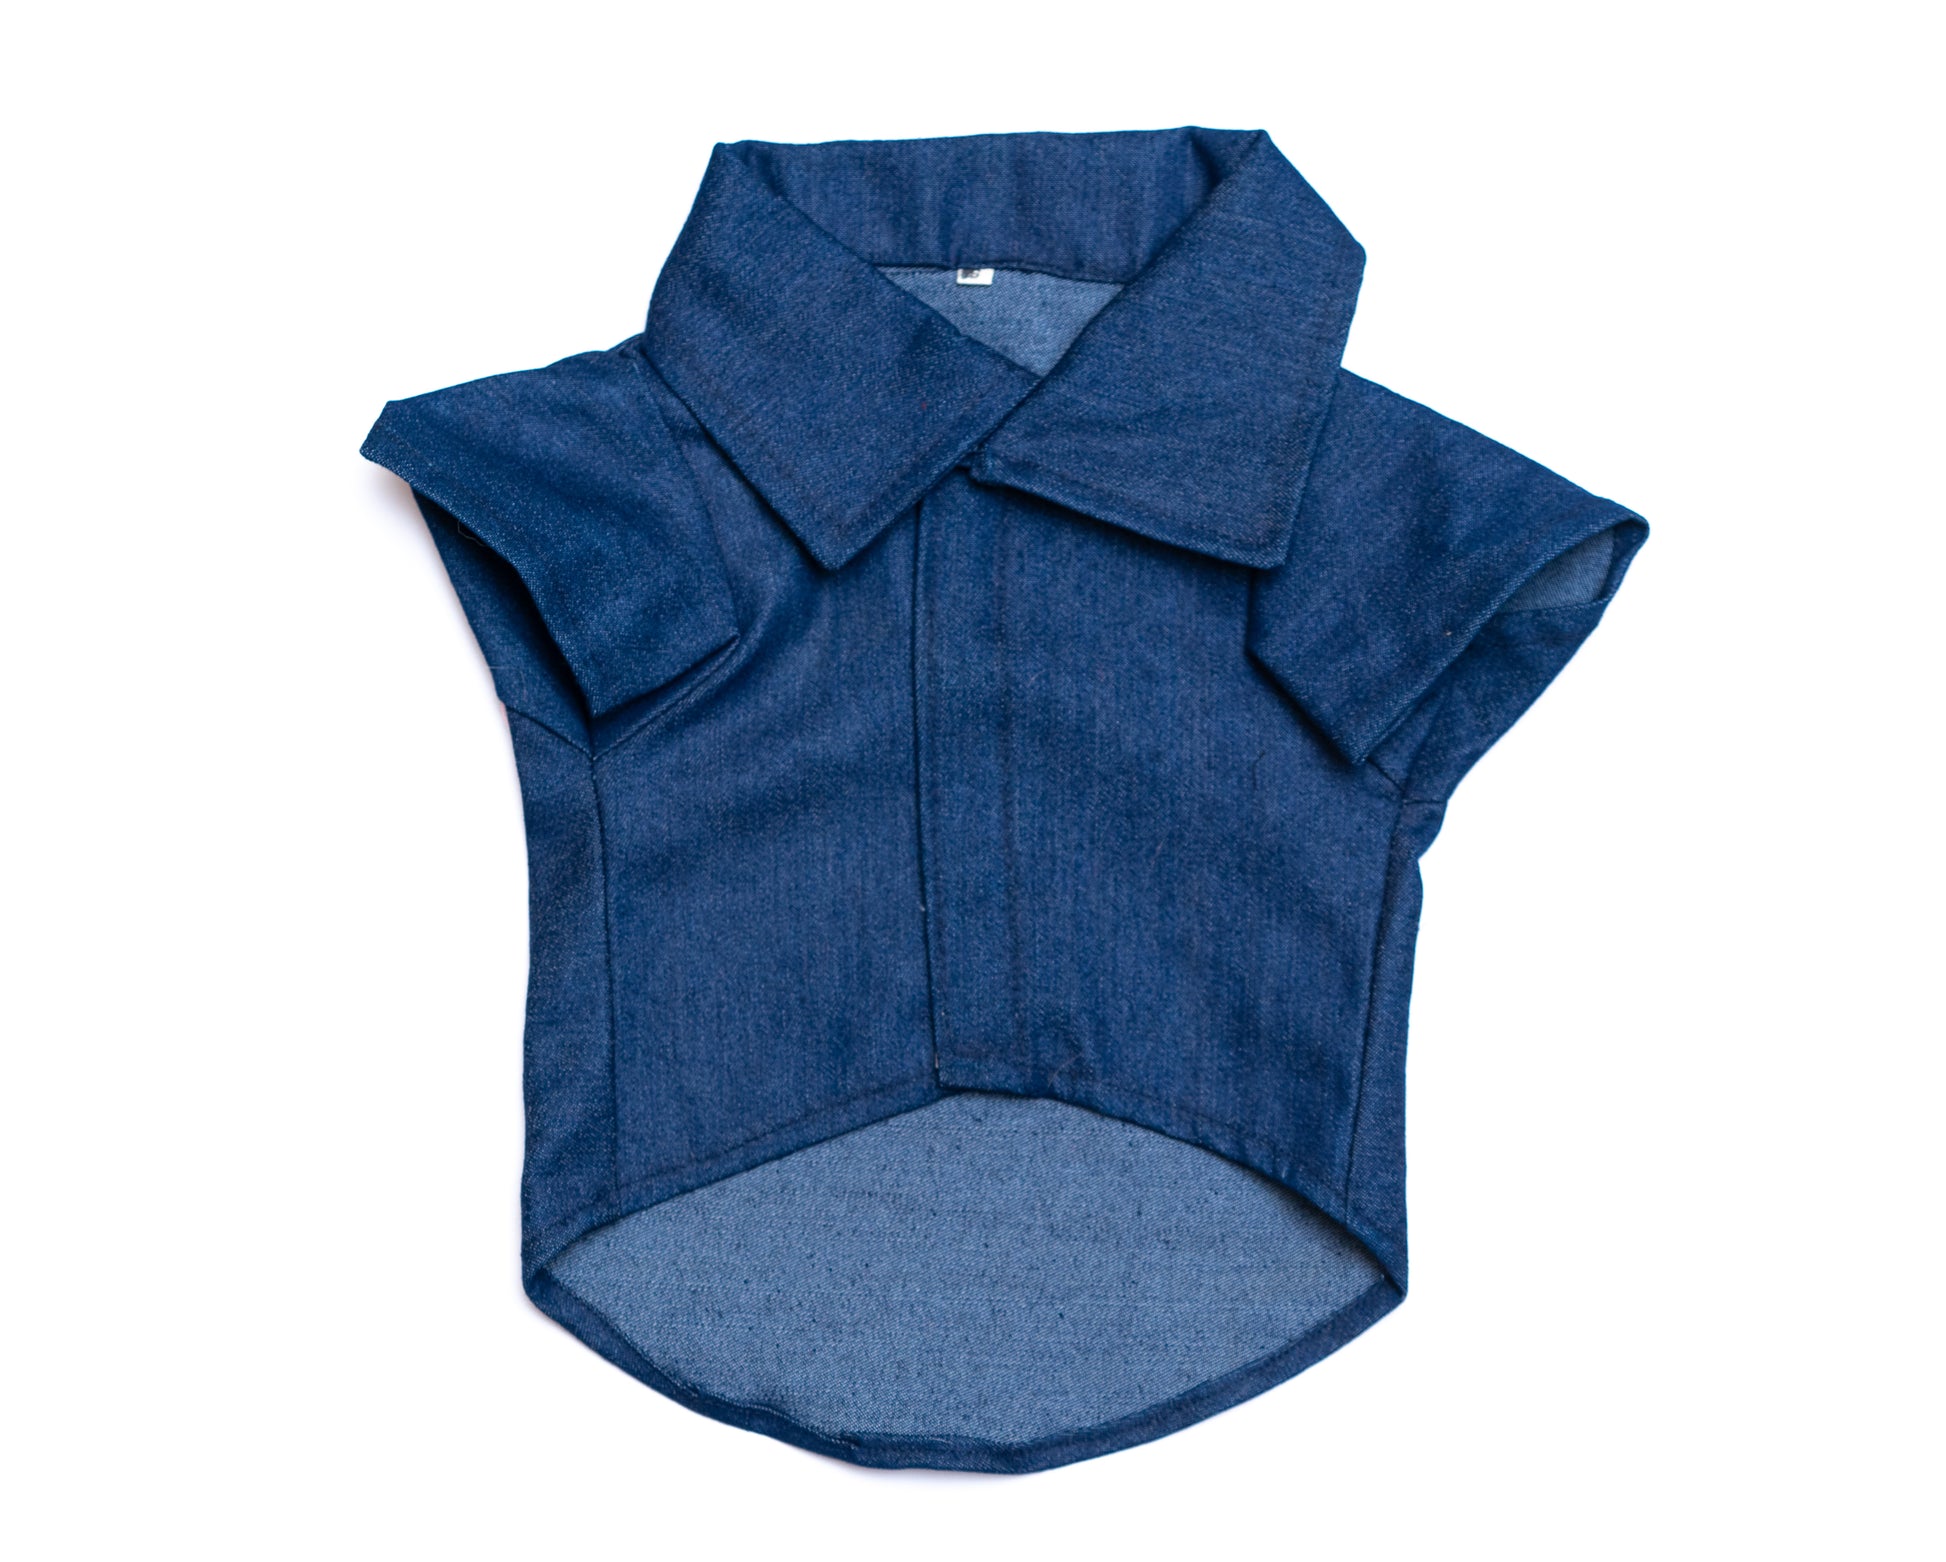 Pawgy Pets Denim shirt with patch for Dogs